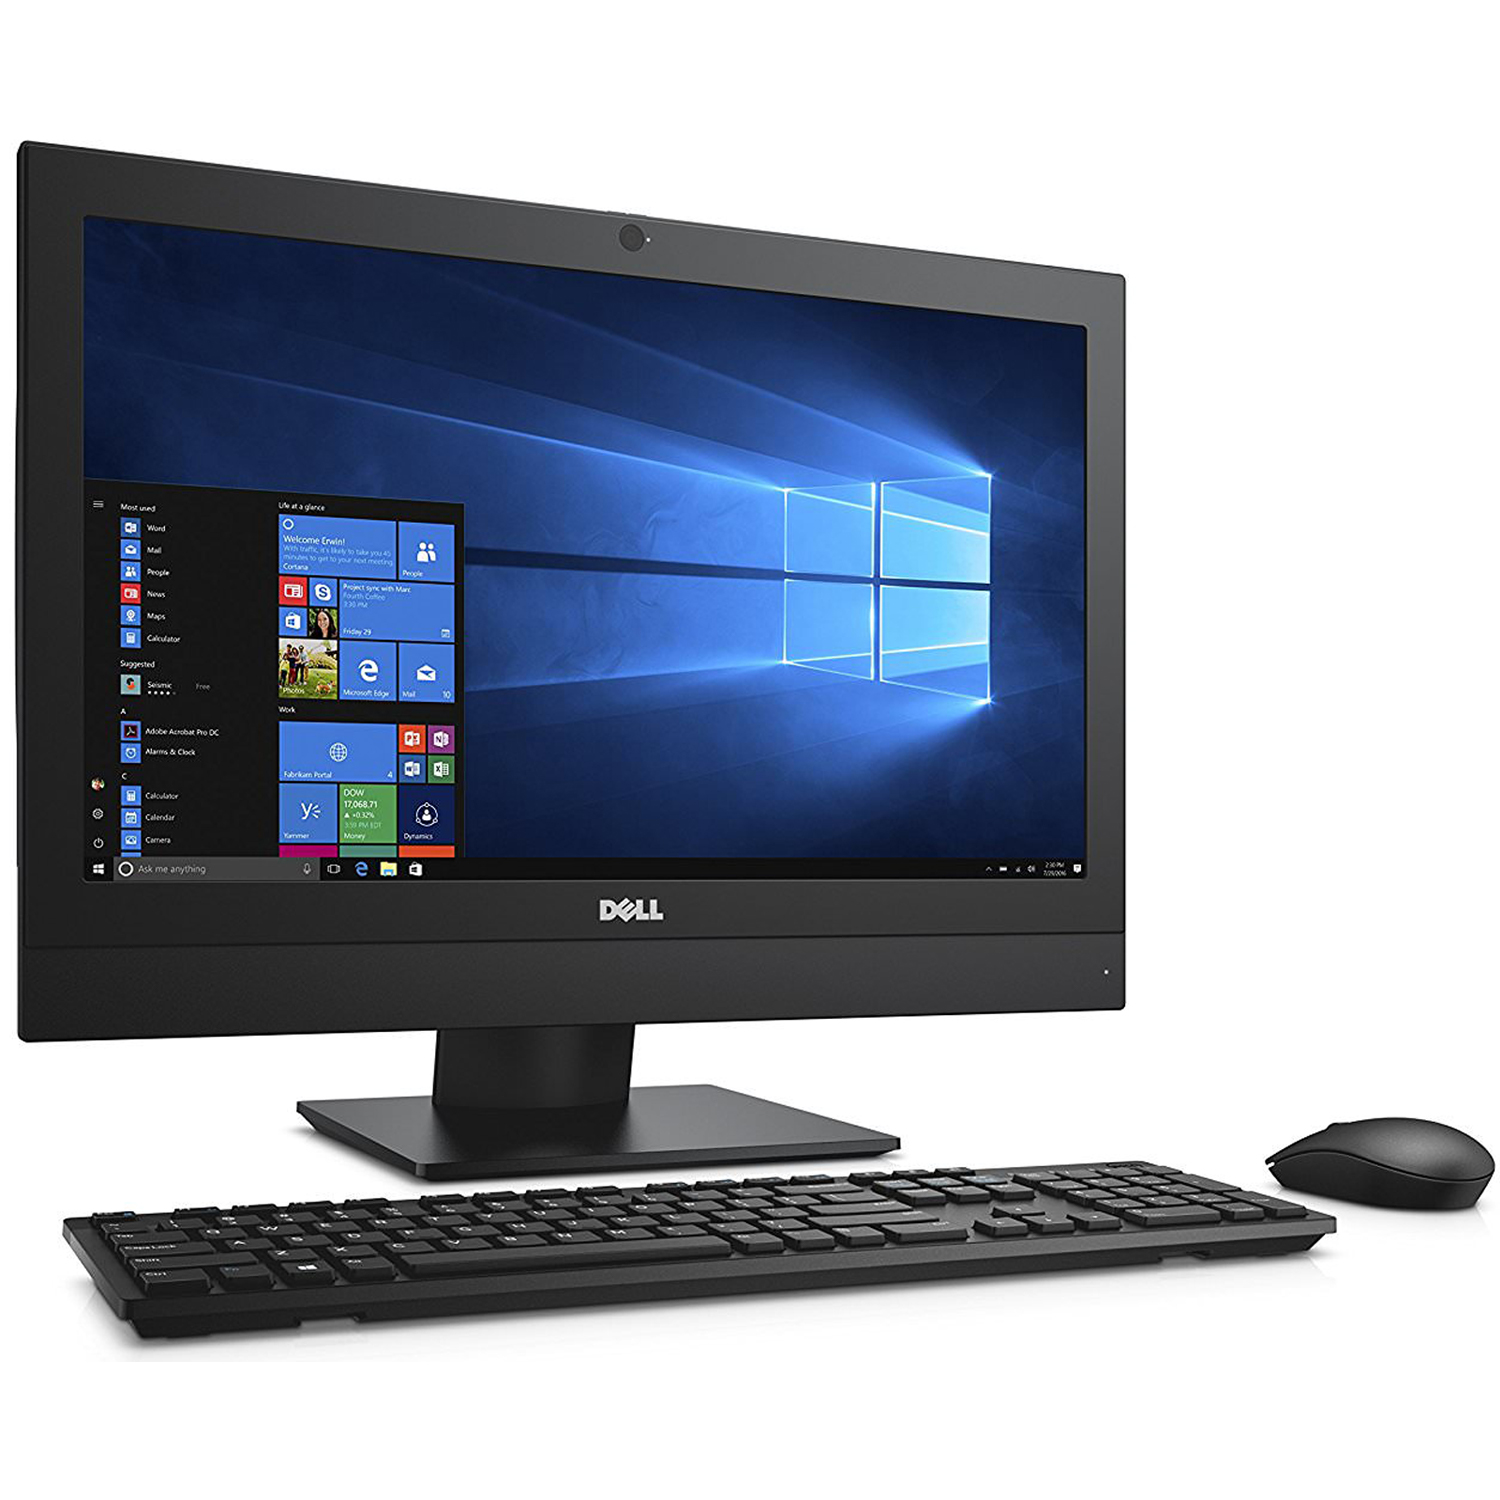 Dell Opt 5250 All In One Computer 21.5" HD Display, Intel Core i5-7500 7th Gen Processor, 16GB Memory, 256GB SSD, Windows 10 Home, HDMI, Displayport, Black, 1 Year Warranty (Used, Like New) - image 2 of 6